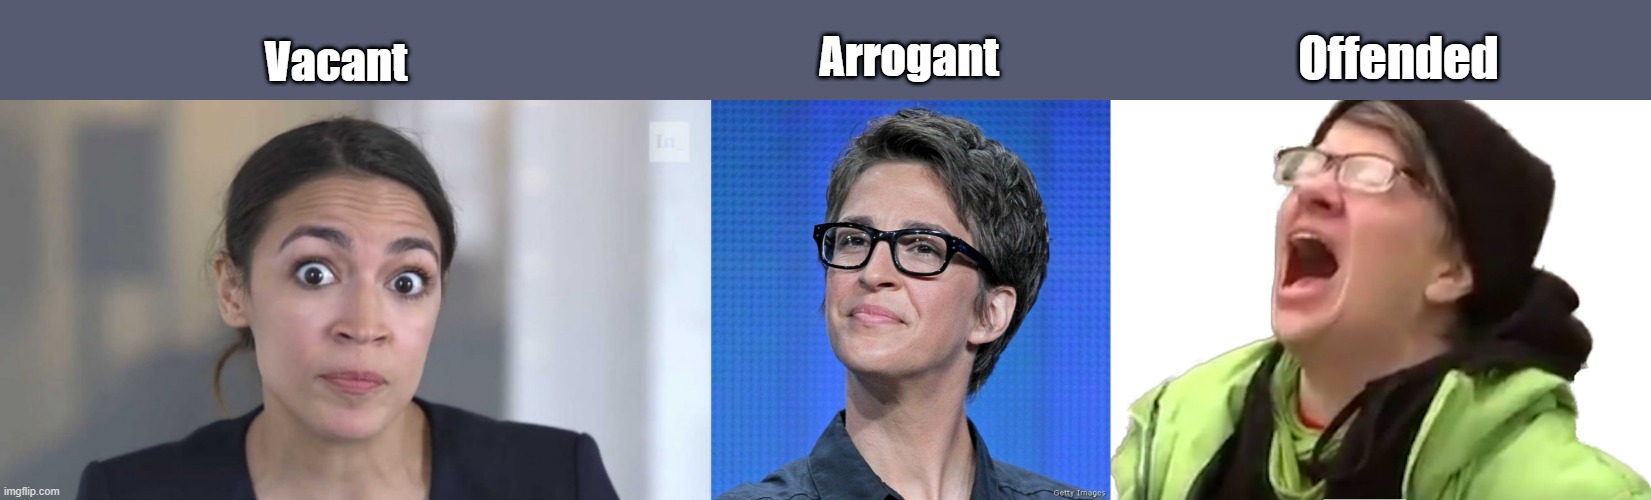 Arrogant; Offended; Vacant | image tagged in crazy alexandria ocasio-cortez,rachel maddow,screaming liberal | made w/ Imgflip meme maker